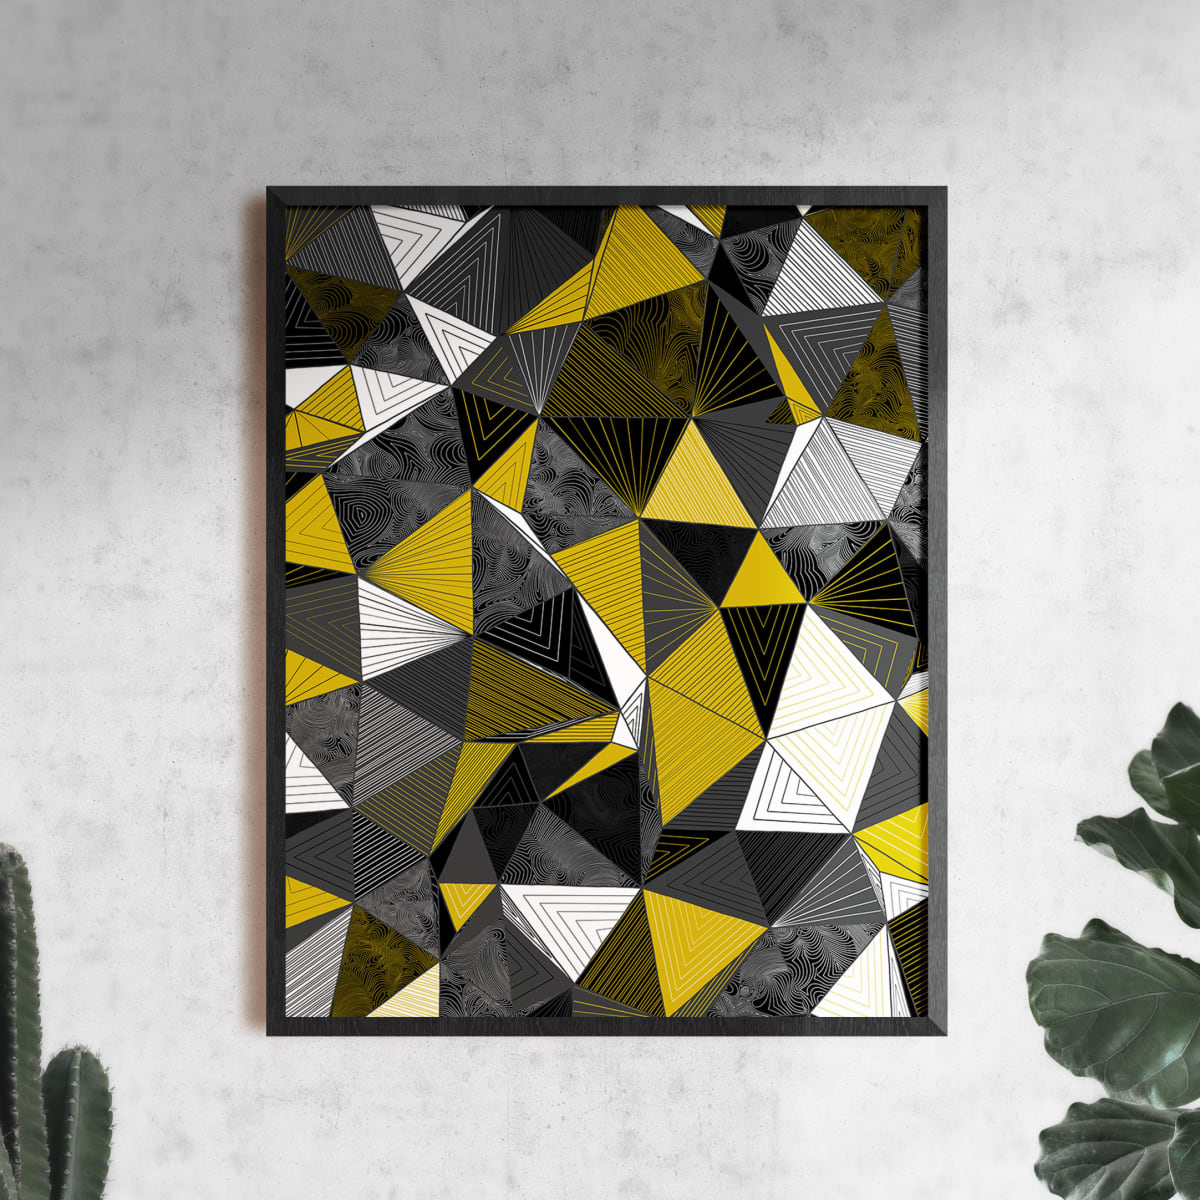 "Conscious Growth 070" Medium One-of-a-Kind Print by Debbie Clapper  Image: Conscious Growth Print 070, a yellow, black and white one of a kind archival modern art print